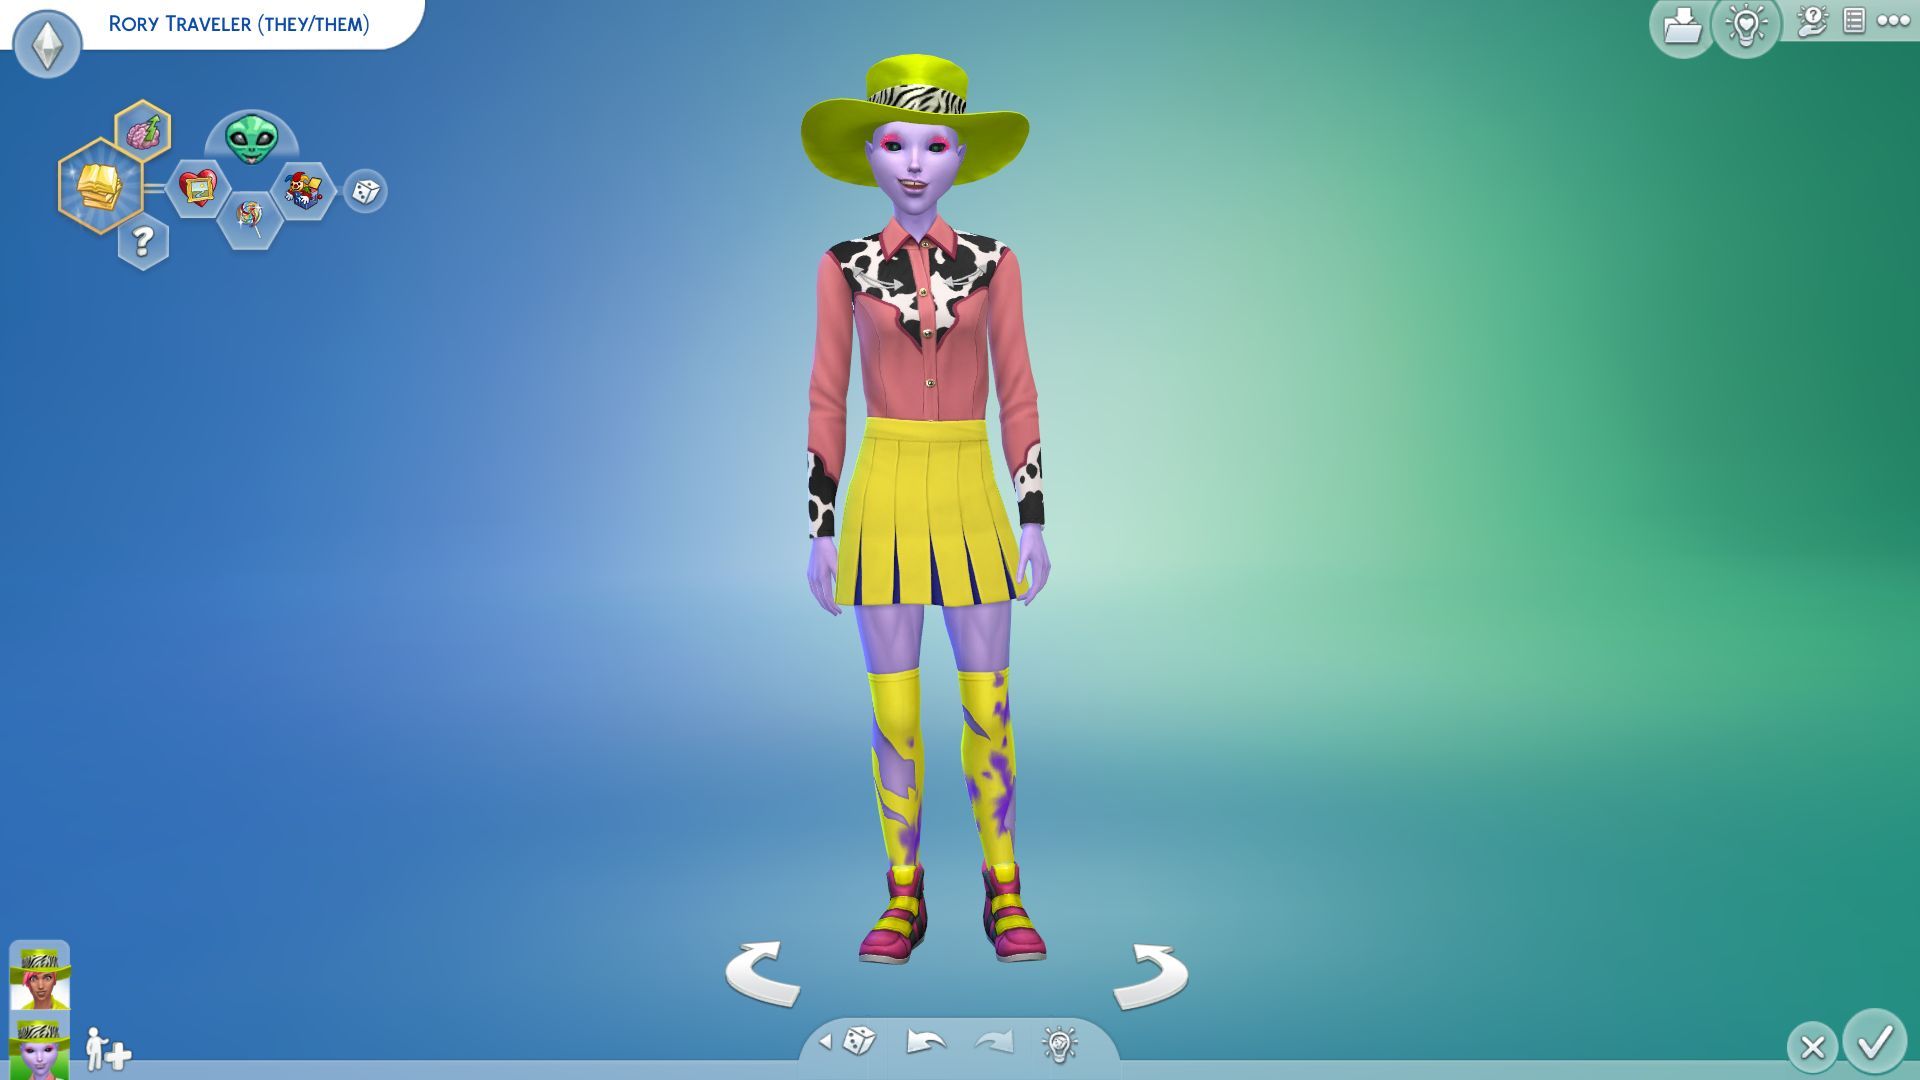 An image of a ... colourfully dressed alien from The Sims 4, wearing an outfit that includes a broad-brimmed hat with zebra stripes and a cowboy shirt with cow spots.